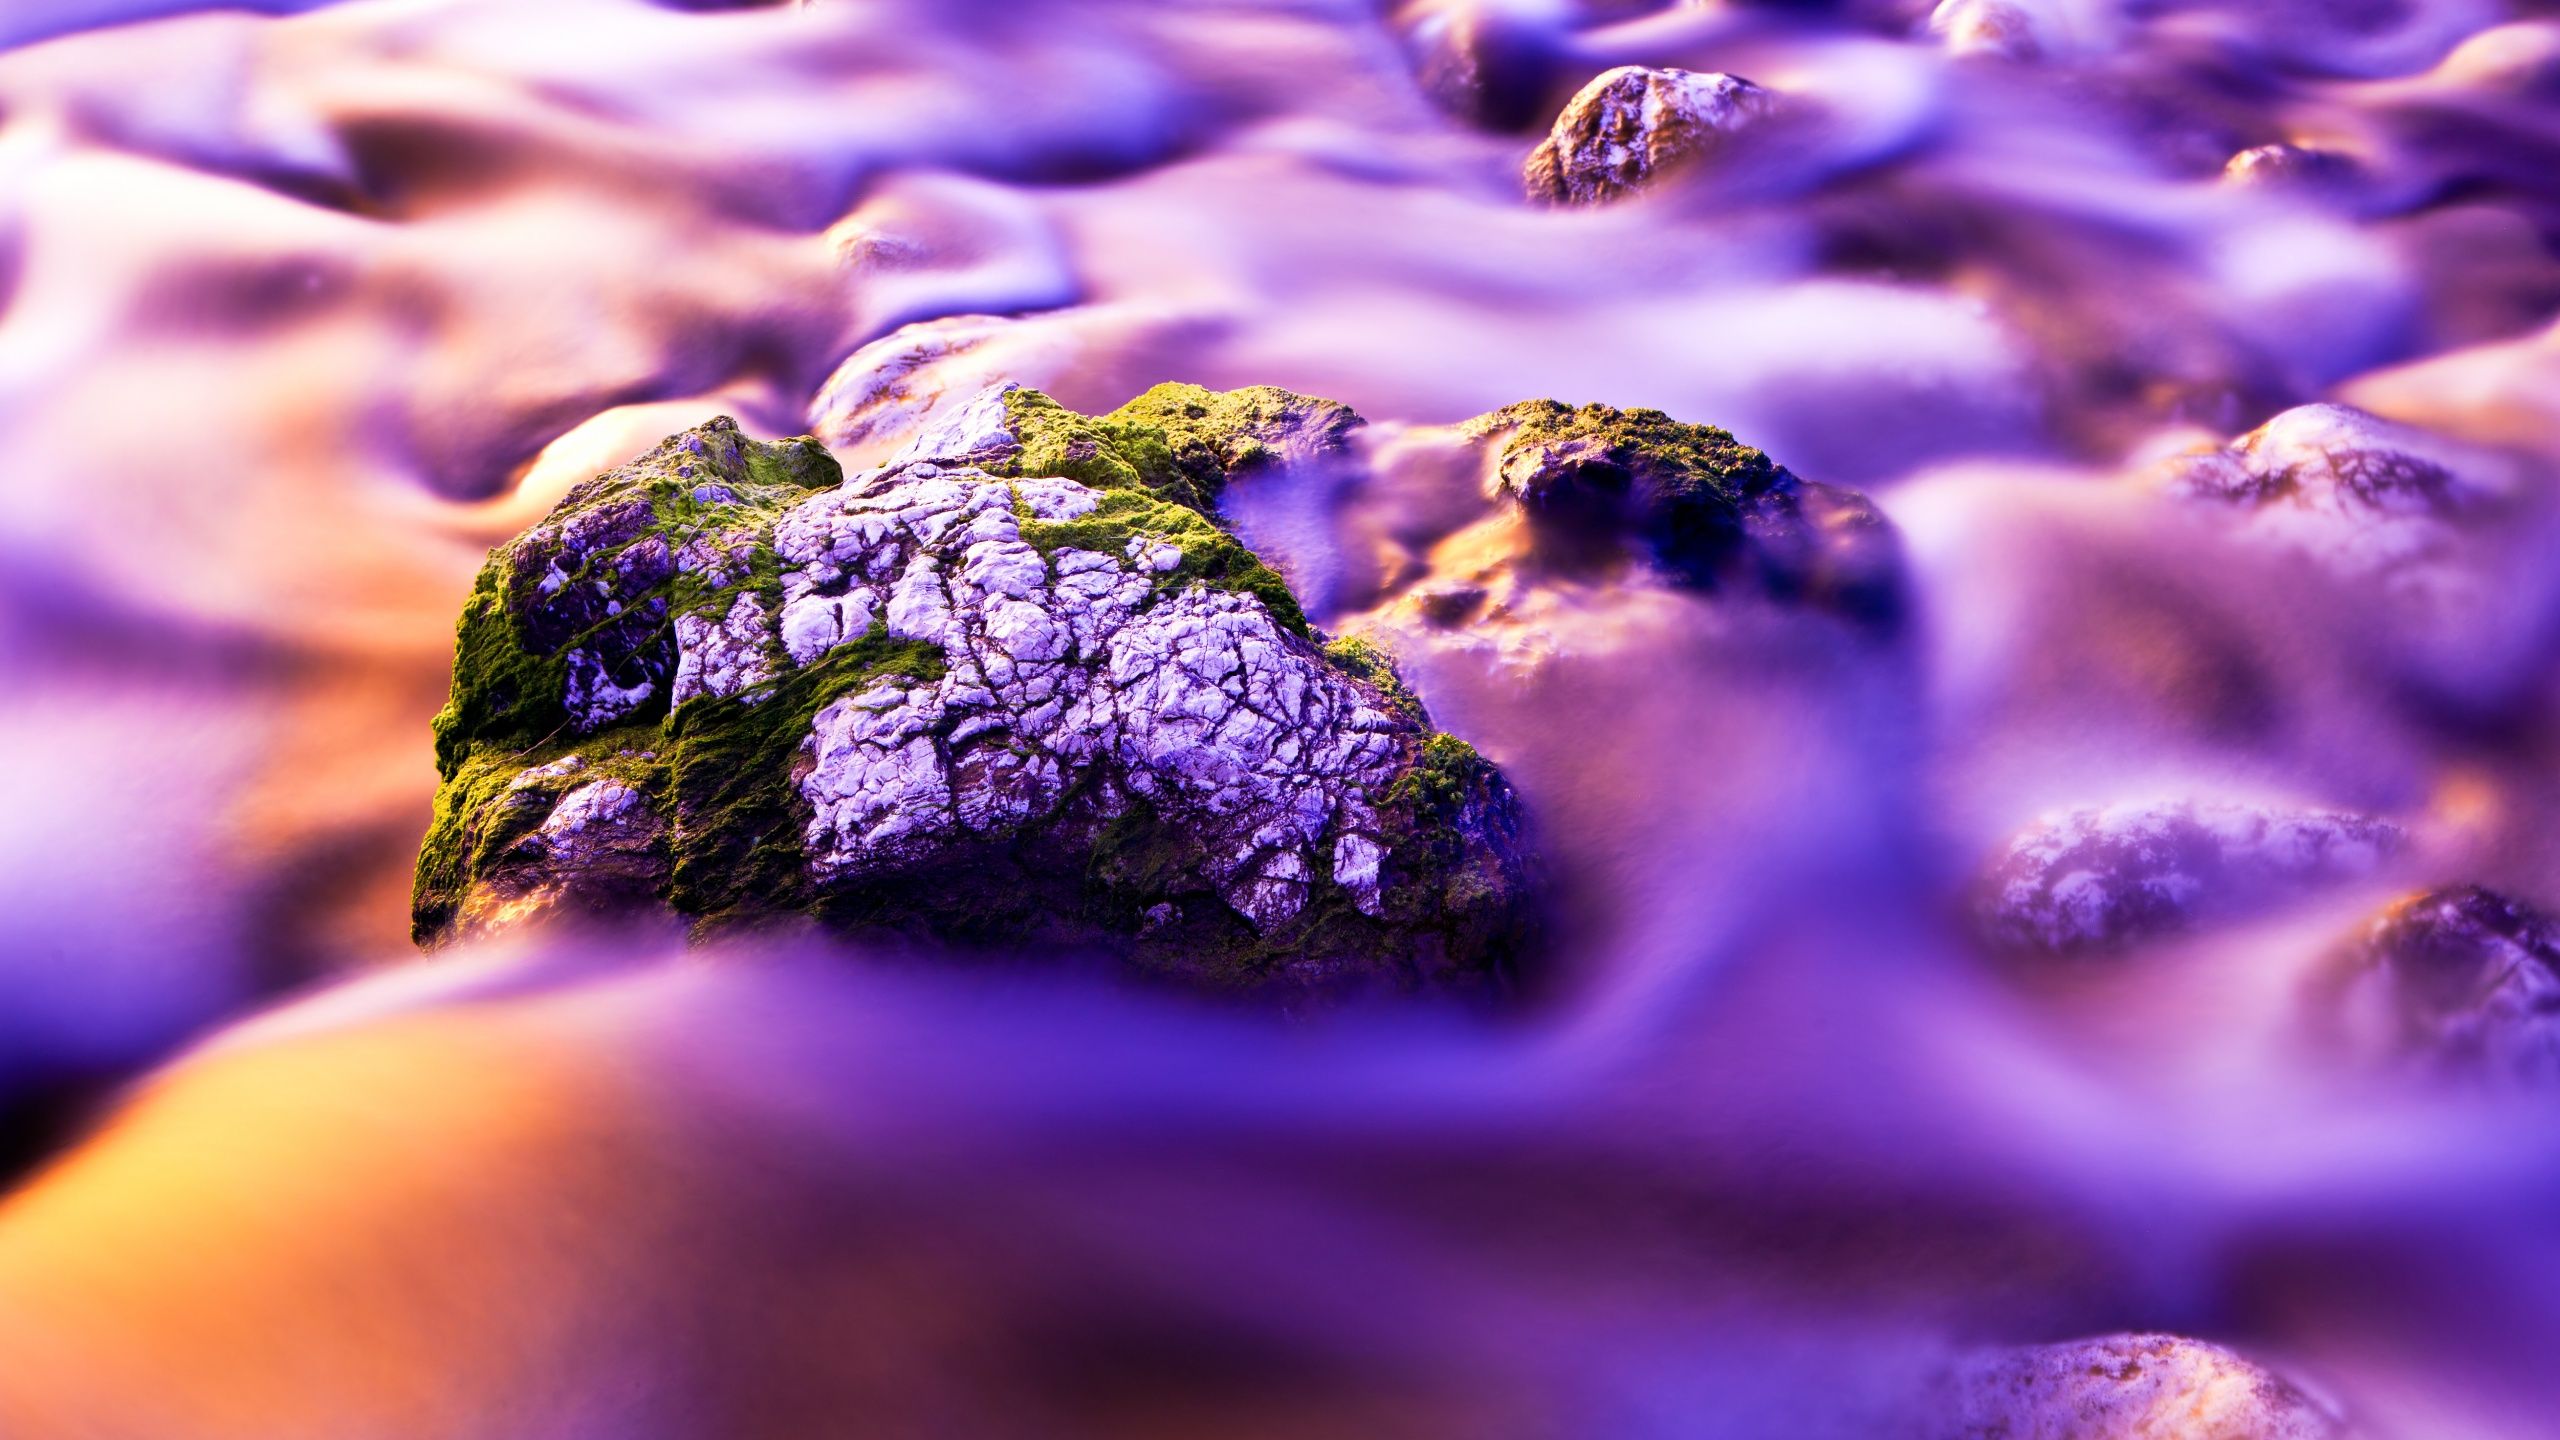 A close up of a rock with moss on it in a river. - IMac